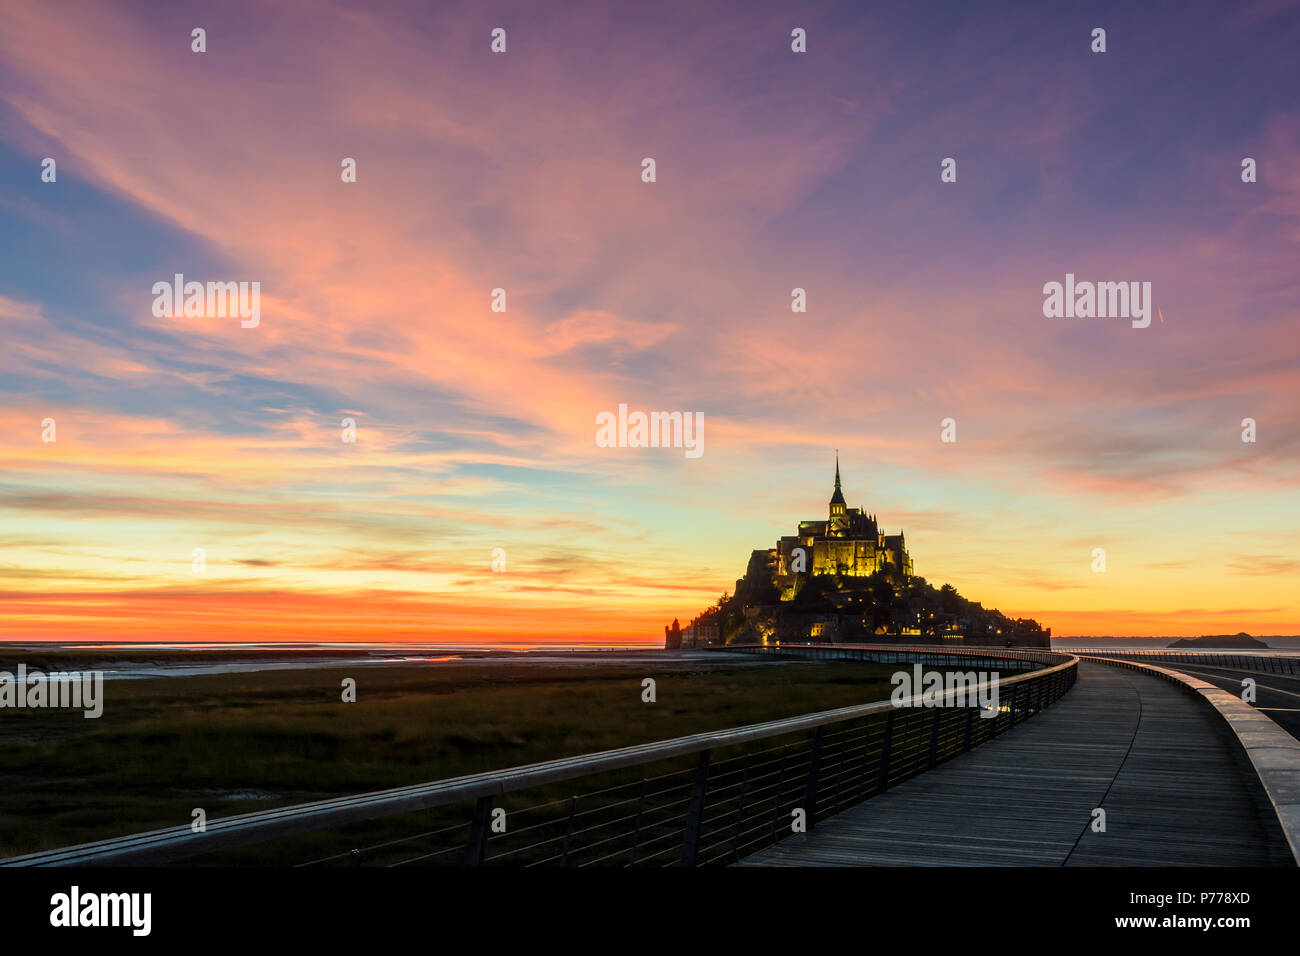 View of the Mont Saint-Michel tidal island in Normandy, France, at nightfall with the wooden jetty in the foreground and purple clouds in the sky. Stock Photo